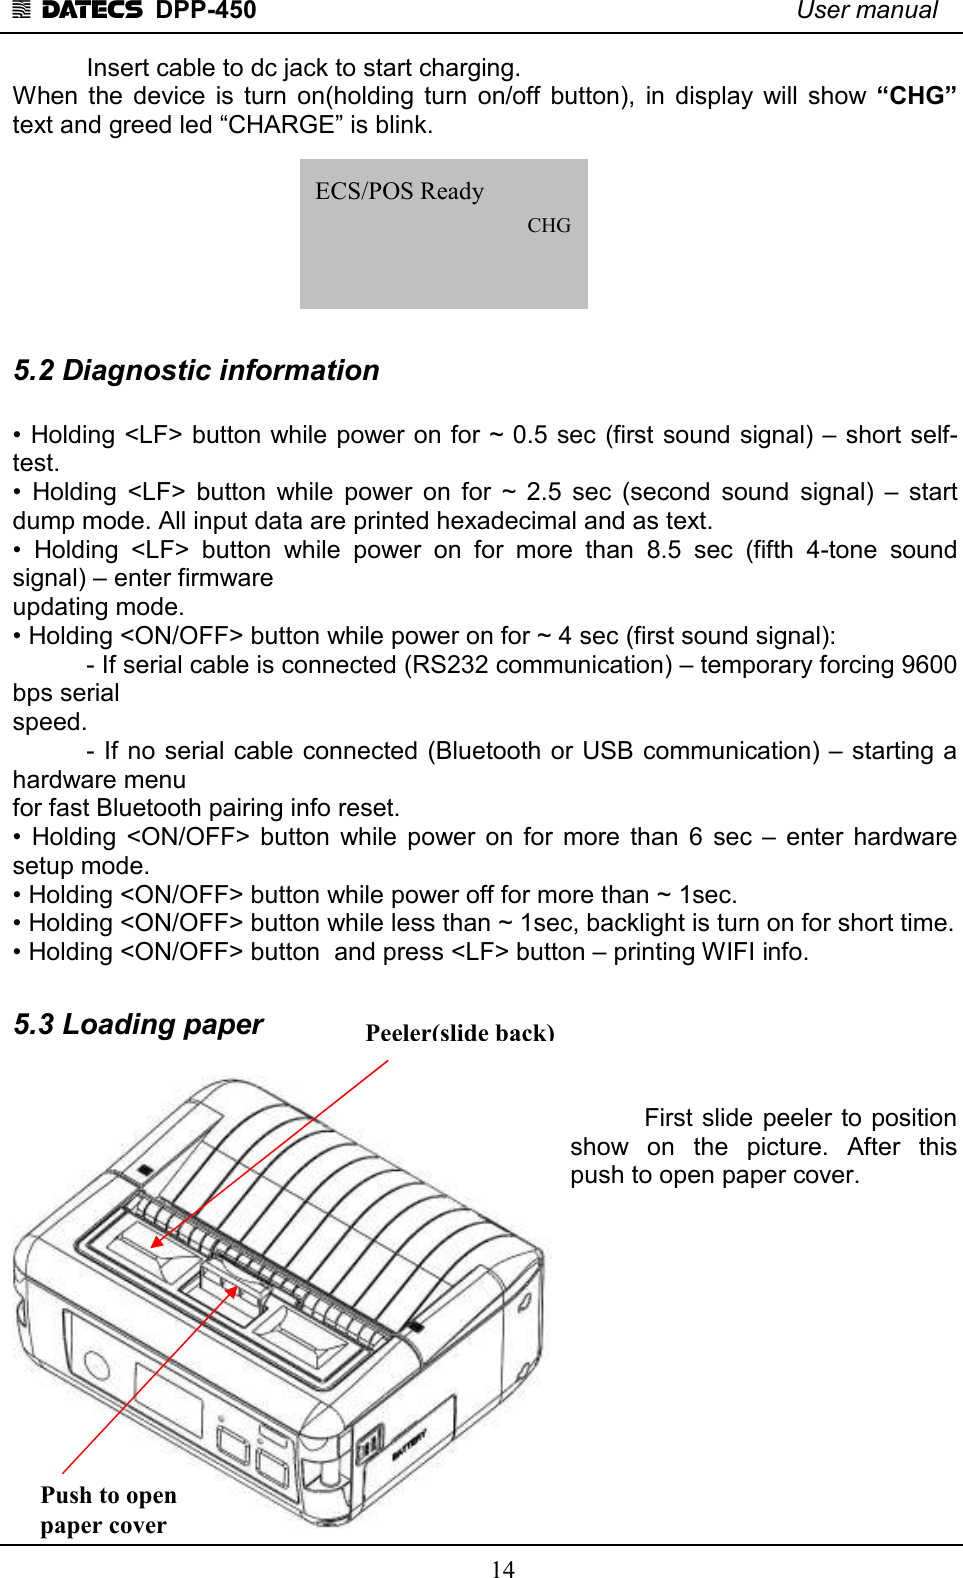 1 DATECS  DPP-450    User manual     14   Insert cable to dc jack to start charging.  When the  device  is  turn  on(holding  turn  on/off  button),  in  display  will  show  “CHG” text and greed led “CHARGE” is blink.        5.2 Diagnostic information  • Holding &lt;LF&gt; button while power on for ~ 0.5 sec (first sound signal) – short self-test. •  Holding  &lt;LF&gt;  button  while  power  on  for  ~  2.5  sec  (second  sound  signal)  –  start dump mode. All input data are printed hexadecimal and as text. •  Holding  &lt;LF&gt;  button  while  power  on  for  more  than  8.5  sec  (fifth  4-tone  sound signal) – enter firmware updating mode. • Holding &lt;ON/OFF&gt; button while power on for ~ 4 sec (first sound signal): - If serial cable is connected (RS232 communication) – temporary forcing 9600 bps serial speed. - If no serial cable connected (Bluetooth or USB communication) – starting a hardware menu for fast Bluetooth pairing info reset. •  Holding  &lt;ON/OFF&gt;  button  while  power  on  for  more  than  6  sec –  enter  hardware setup mode. • Holding &lt;ON/OFF&gt; button while power off for more than ~ 1sec. • Holding &lt;ON/OFF&gt; button while less than ~ 1sec, backlight is turn on for short time. • Holding &lt;ON/OFF&gt; button  and press &lt;LF&gt; button – printing WIFI info.  5.3 Loading paper     First slide peeler to position show  on  the  picture.  After  this push to open paper cover.            ECS/POS Ready      CHG      Peeler(slide back) Push to open paper cover 